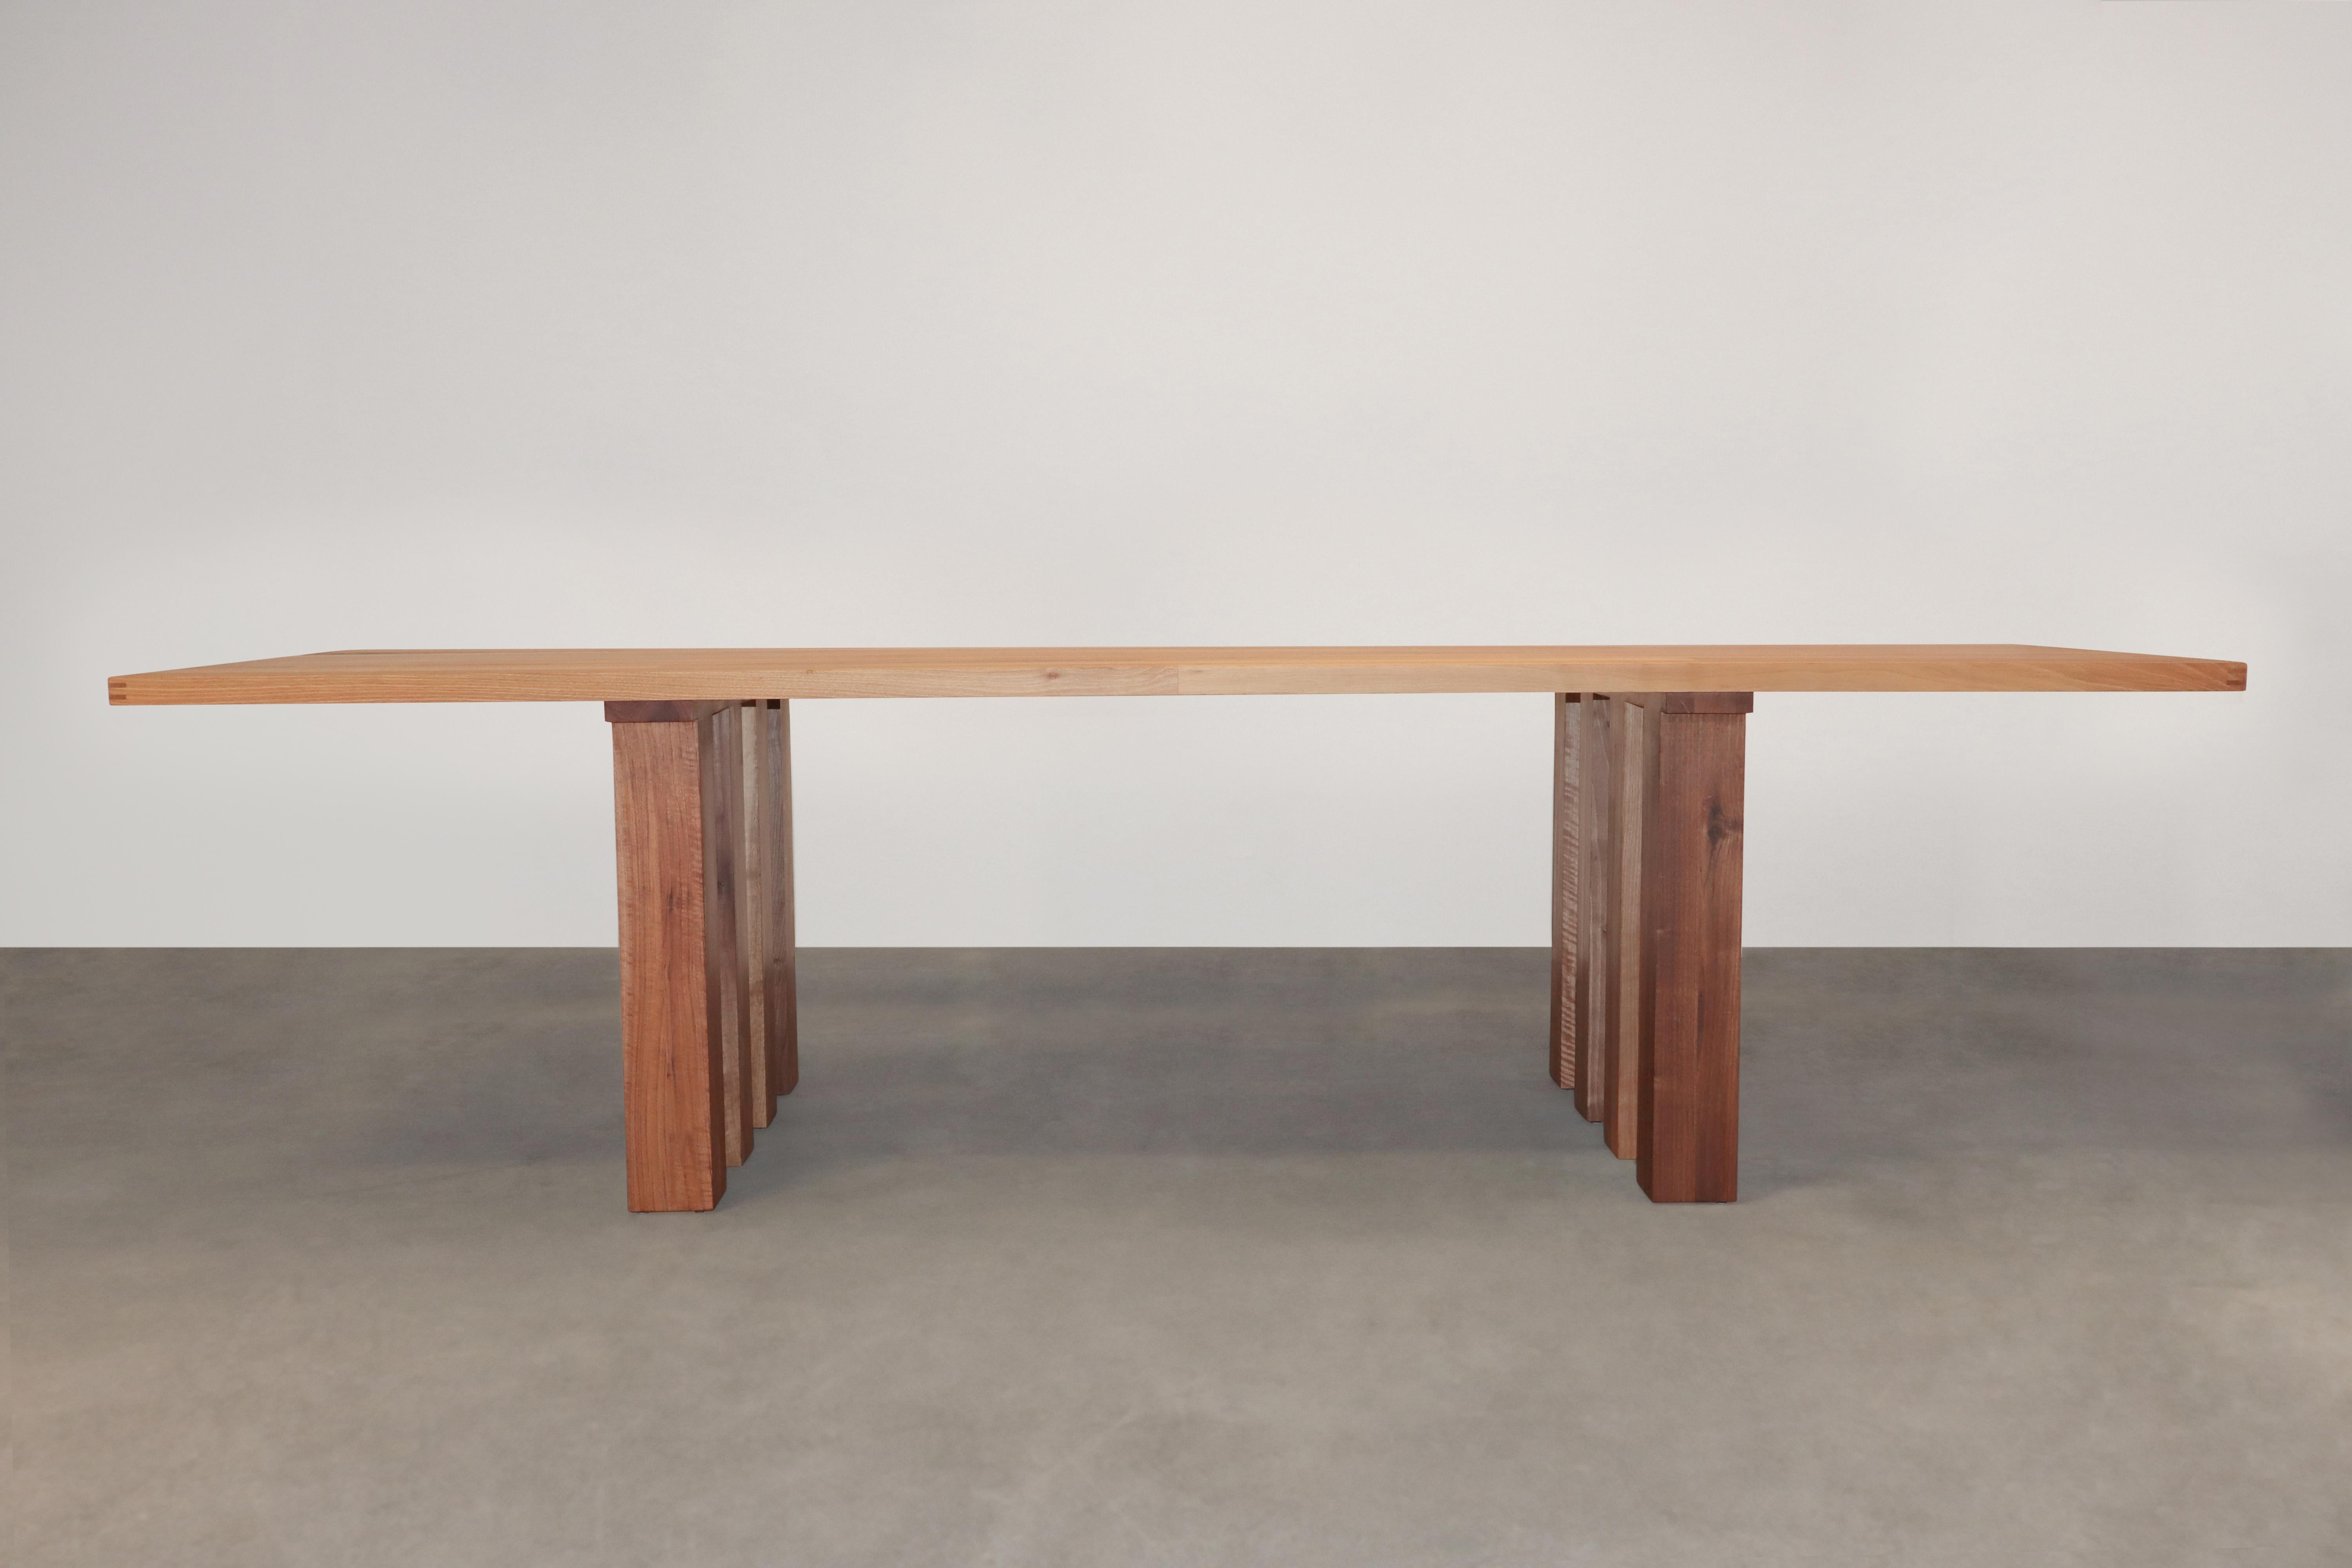 La Basilica is an architectural dining table designed by Mario Bellini in 1978 for Cassina, Italy. Large variant, comfortably seats 8 armchairs.

It is constructed of thick solid European Walnut and has been professionally restored with a